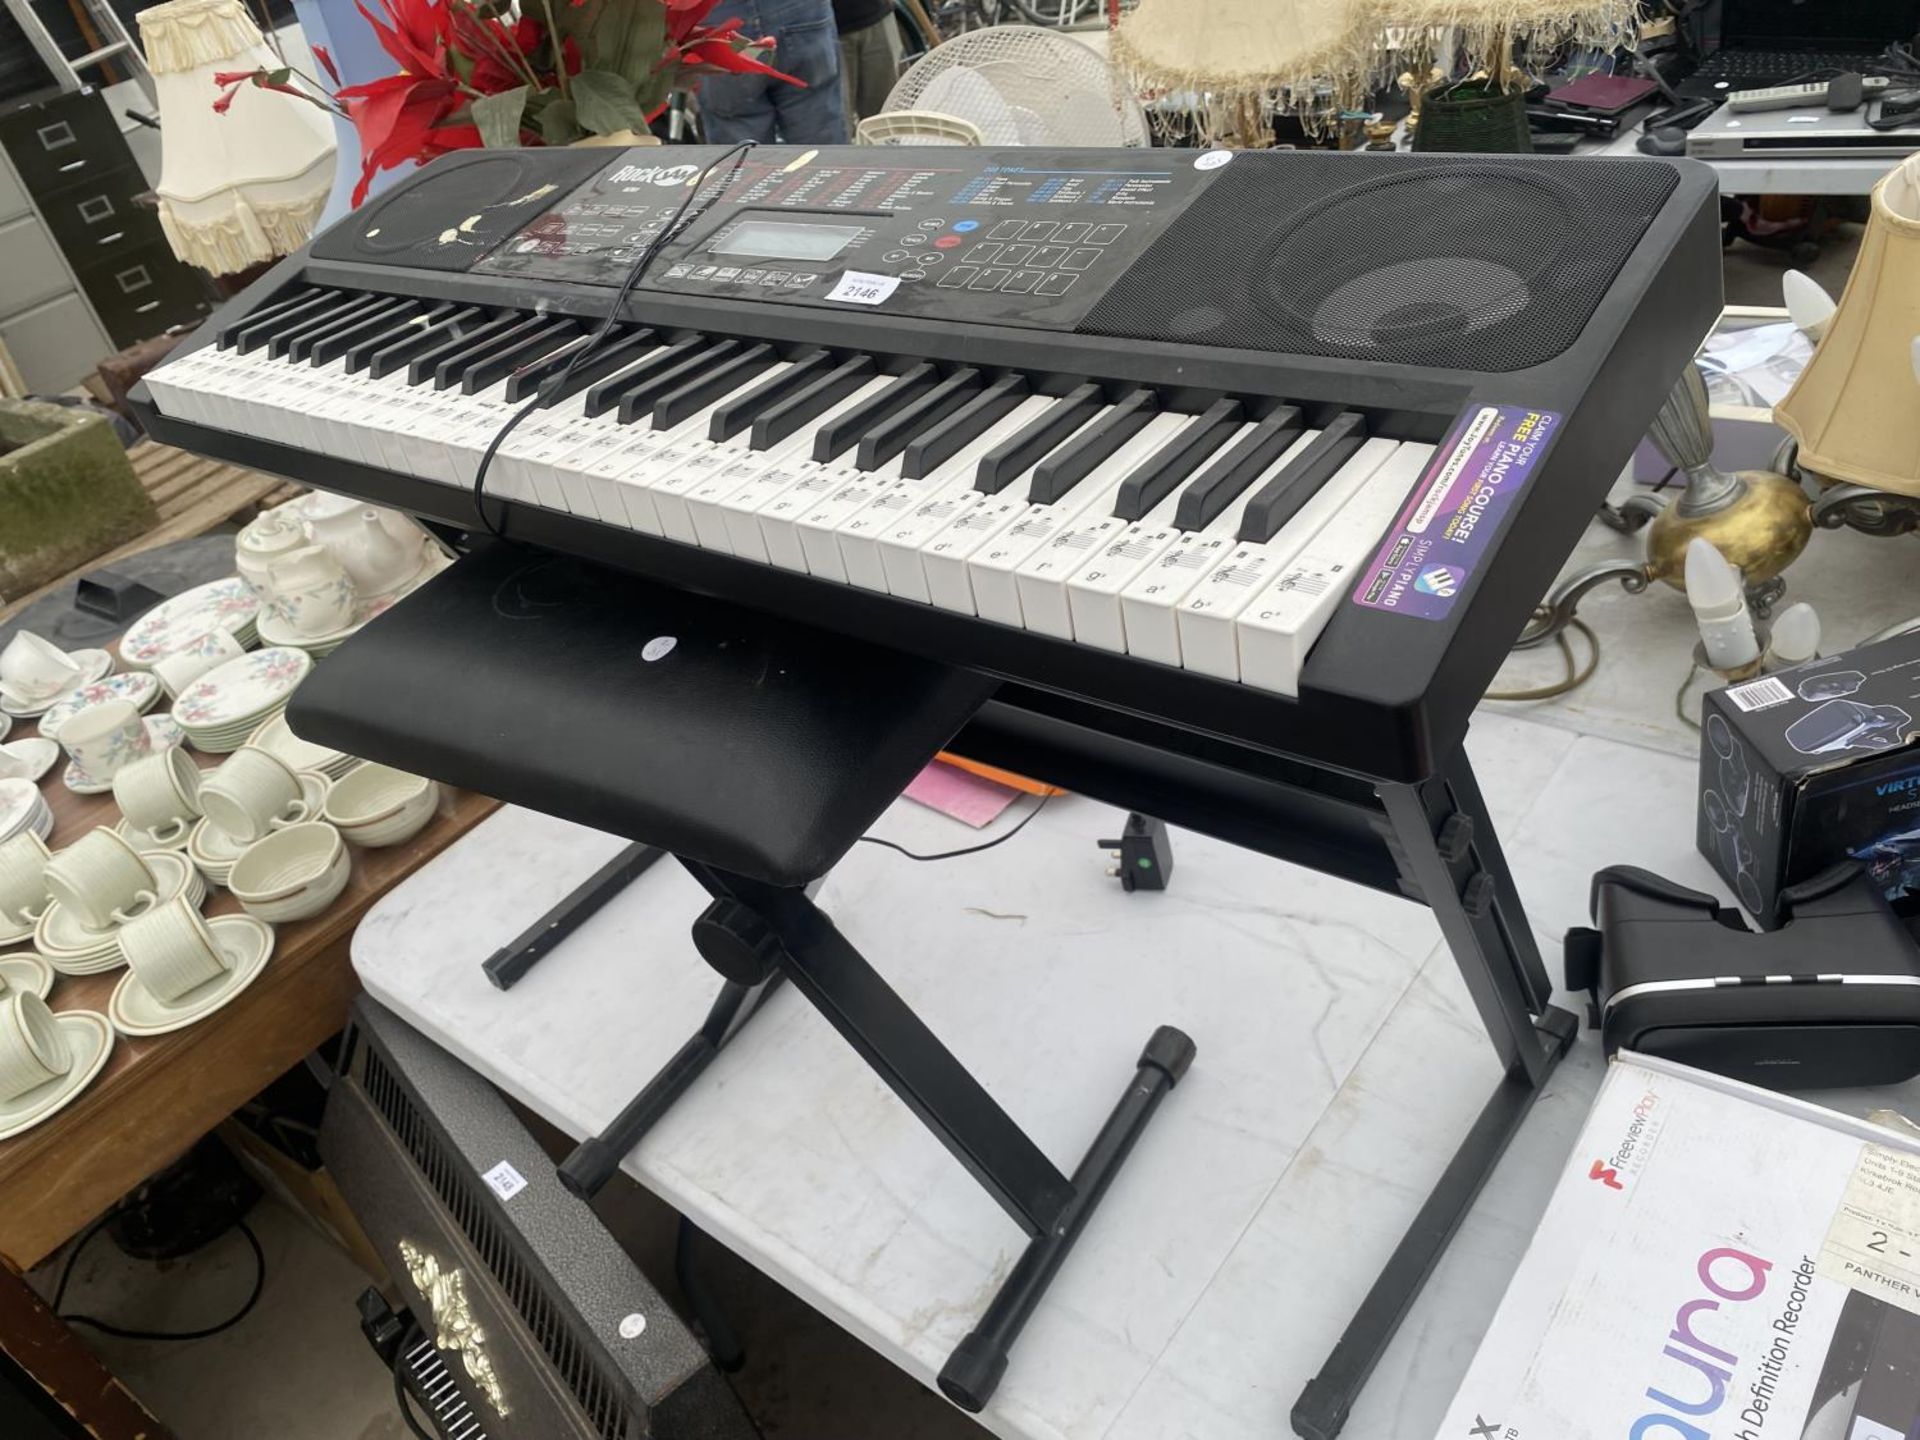 A ROCKJAM ELECTRIC KEYBOARD AND STOOL